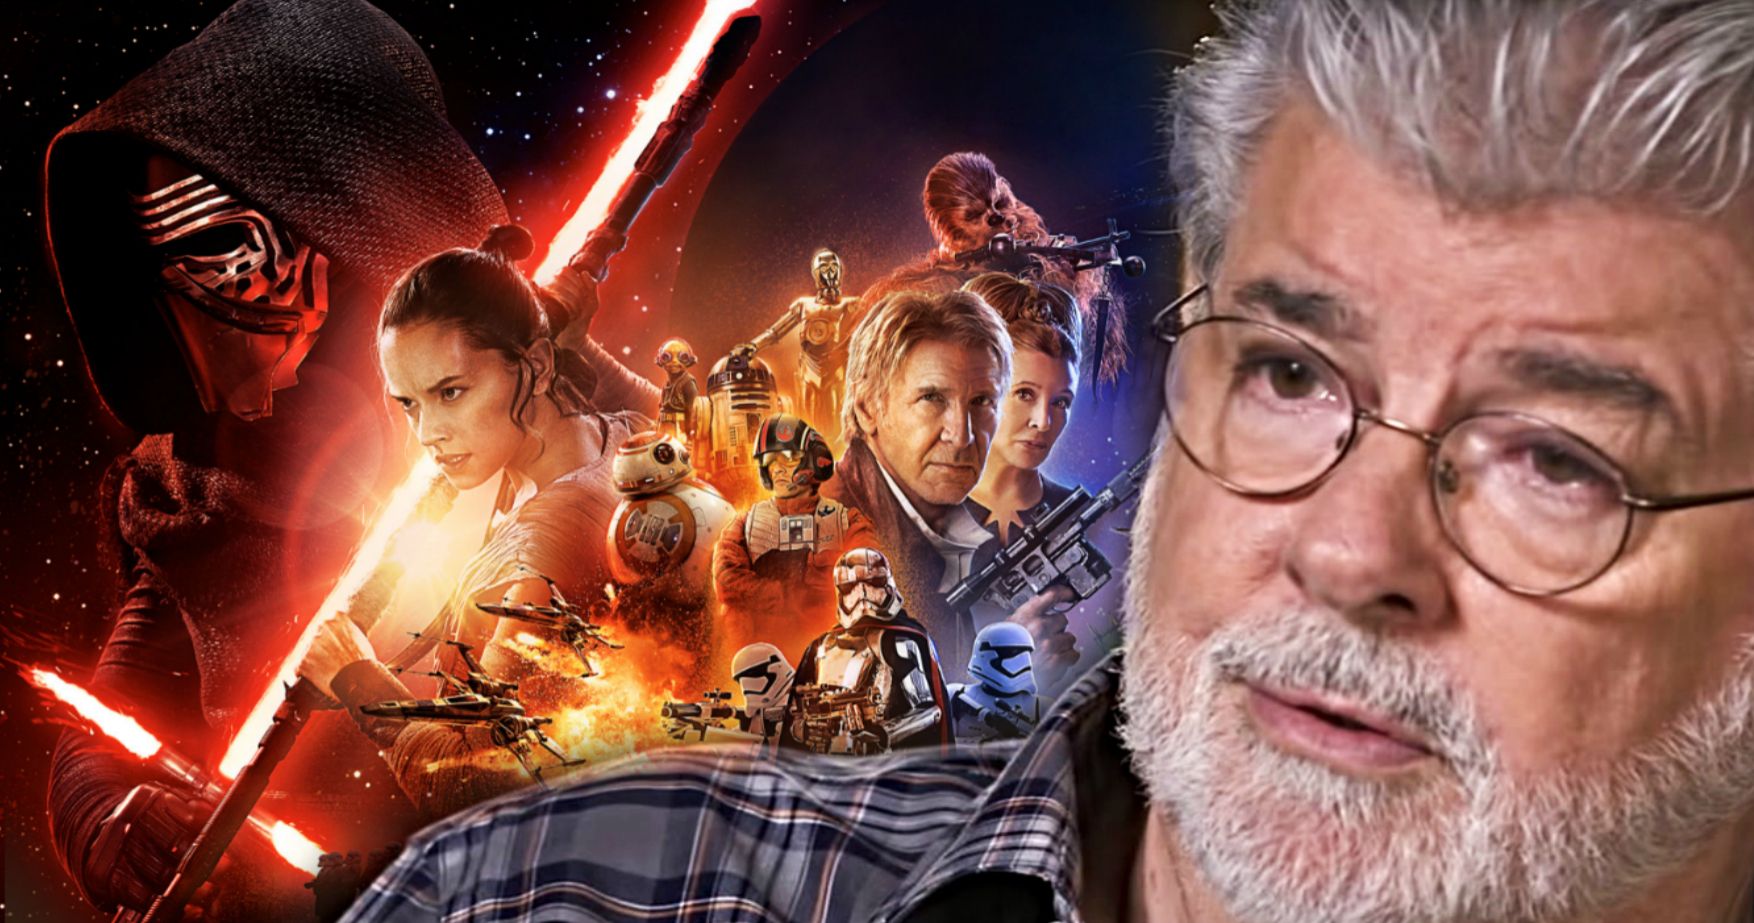 Why The Force Awakens Disappointed George Lucas Explained by Disney Boss